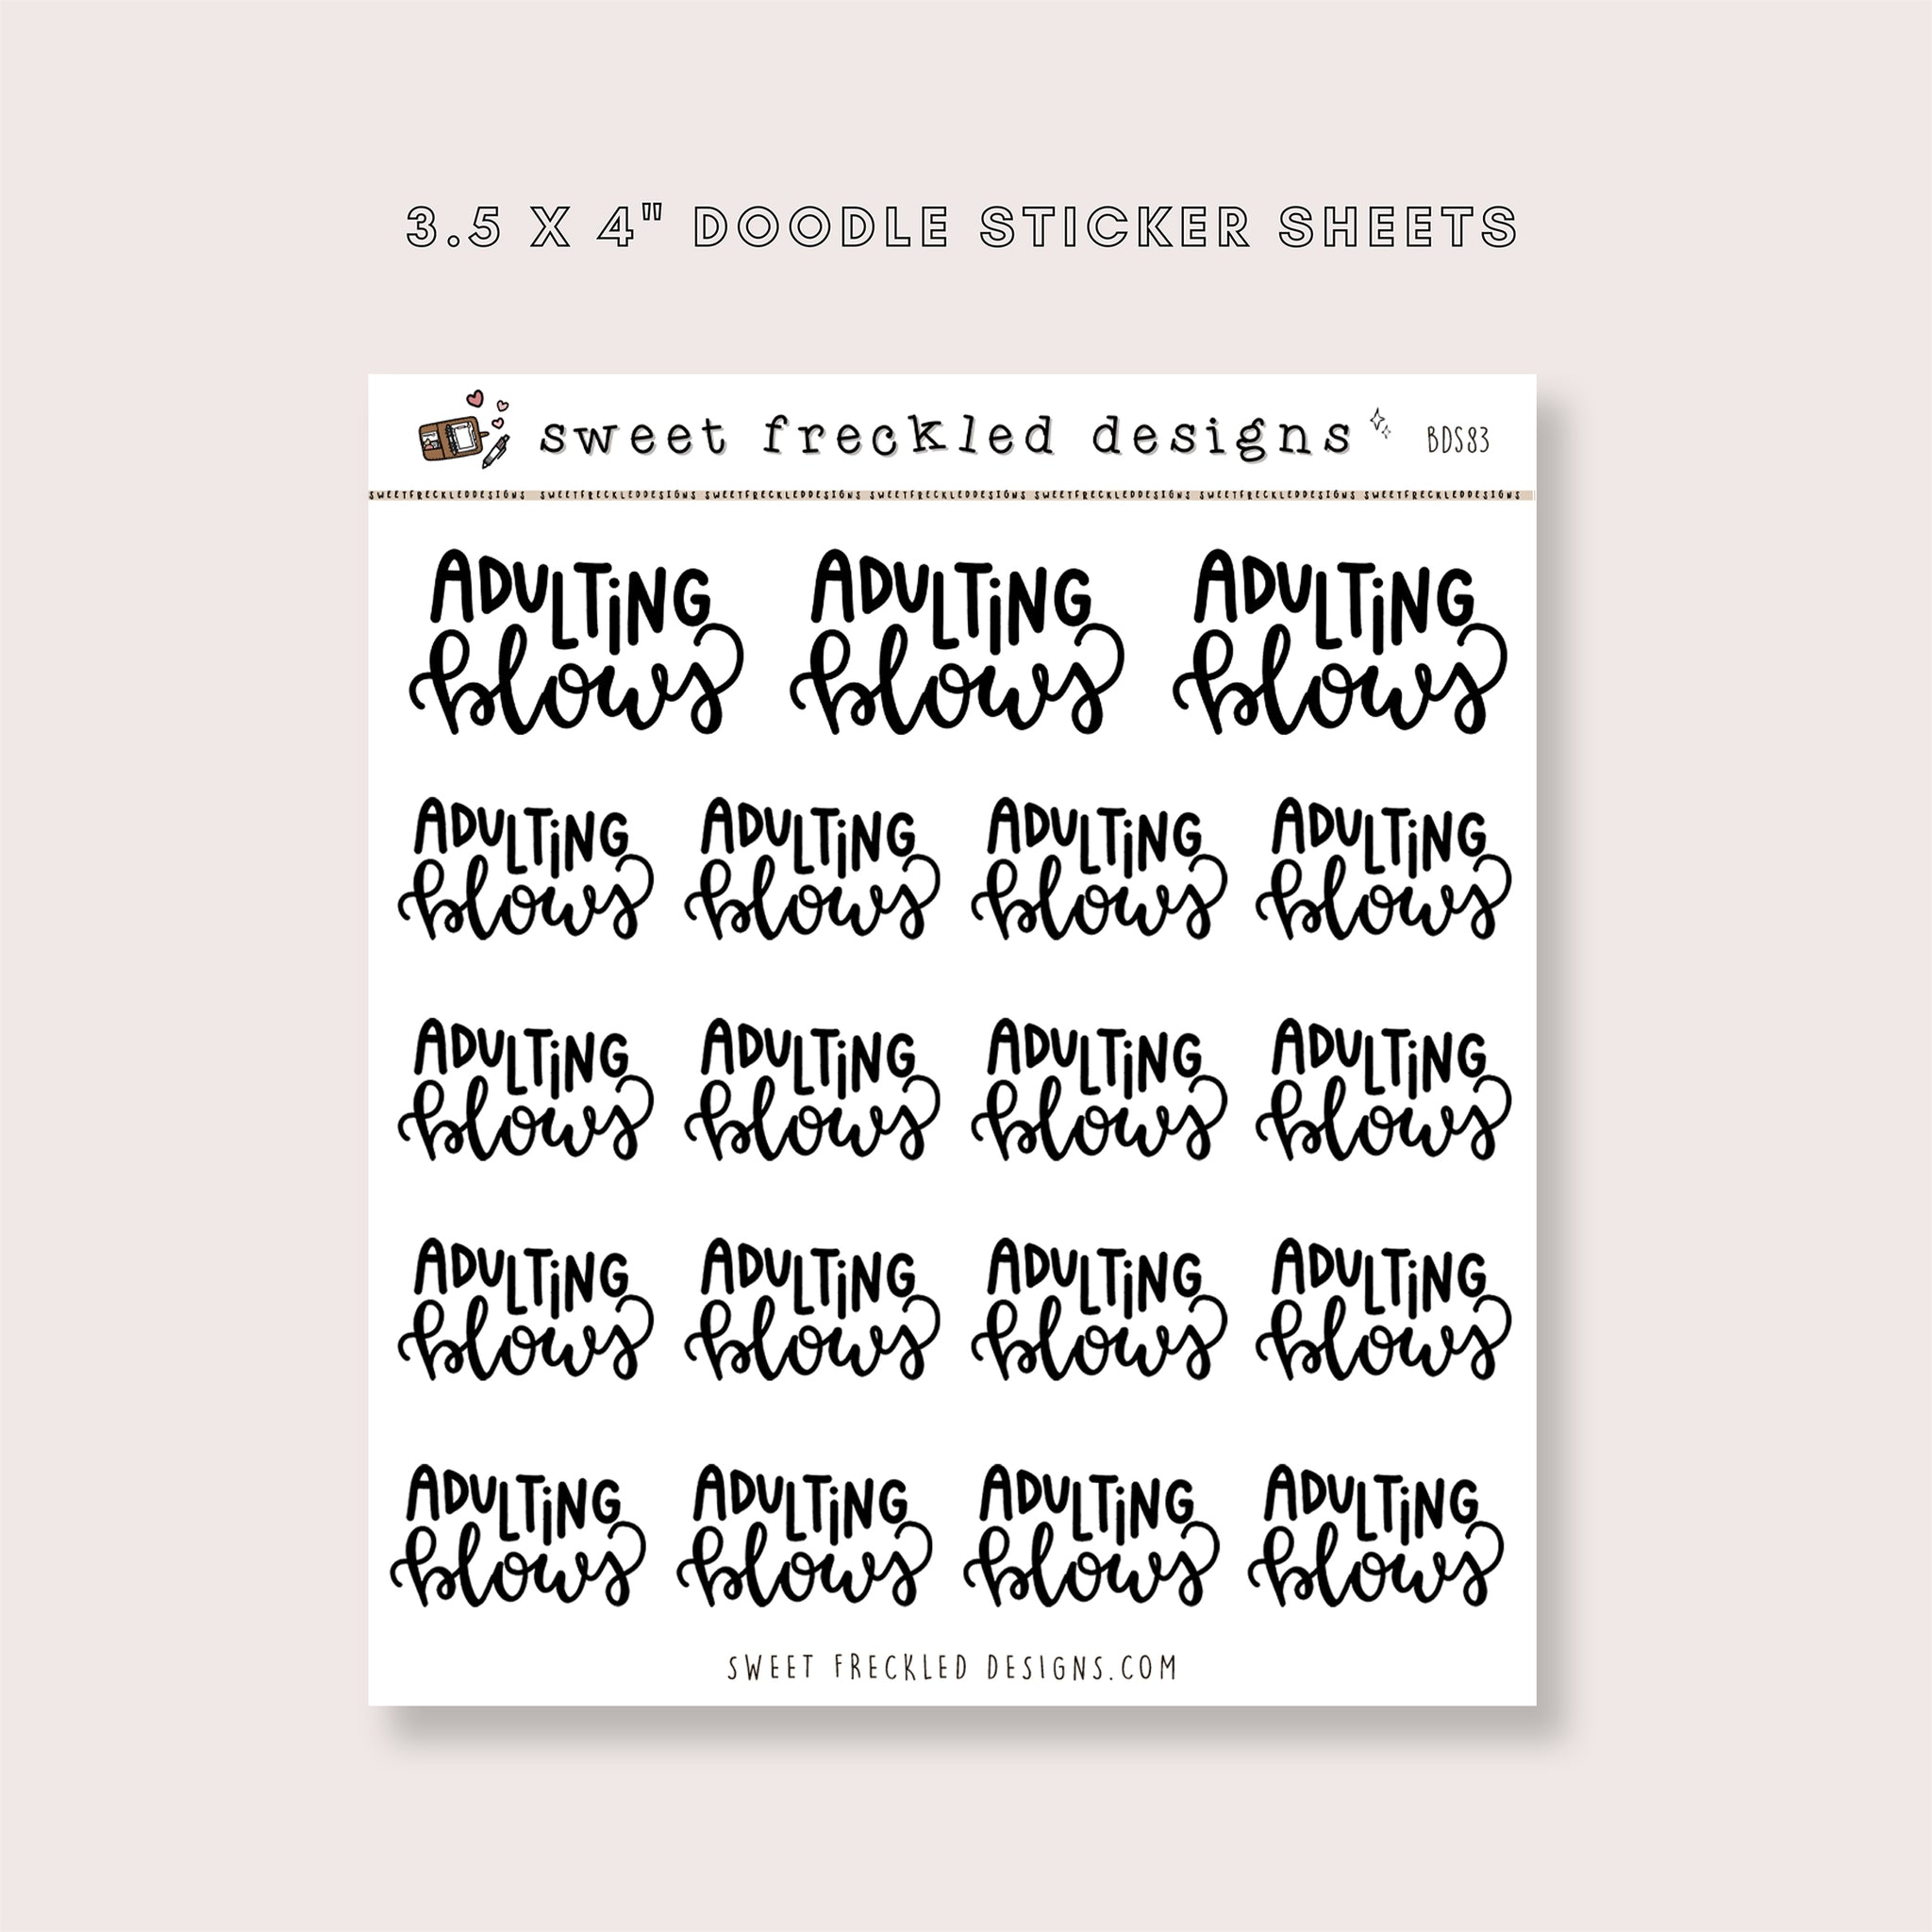 Adulting Blows Lettered Stickers